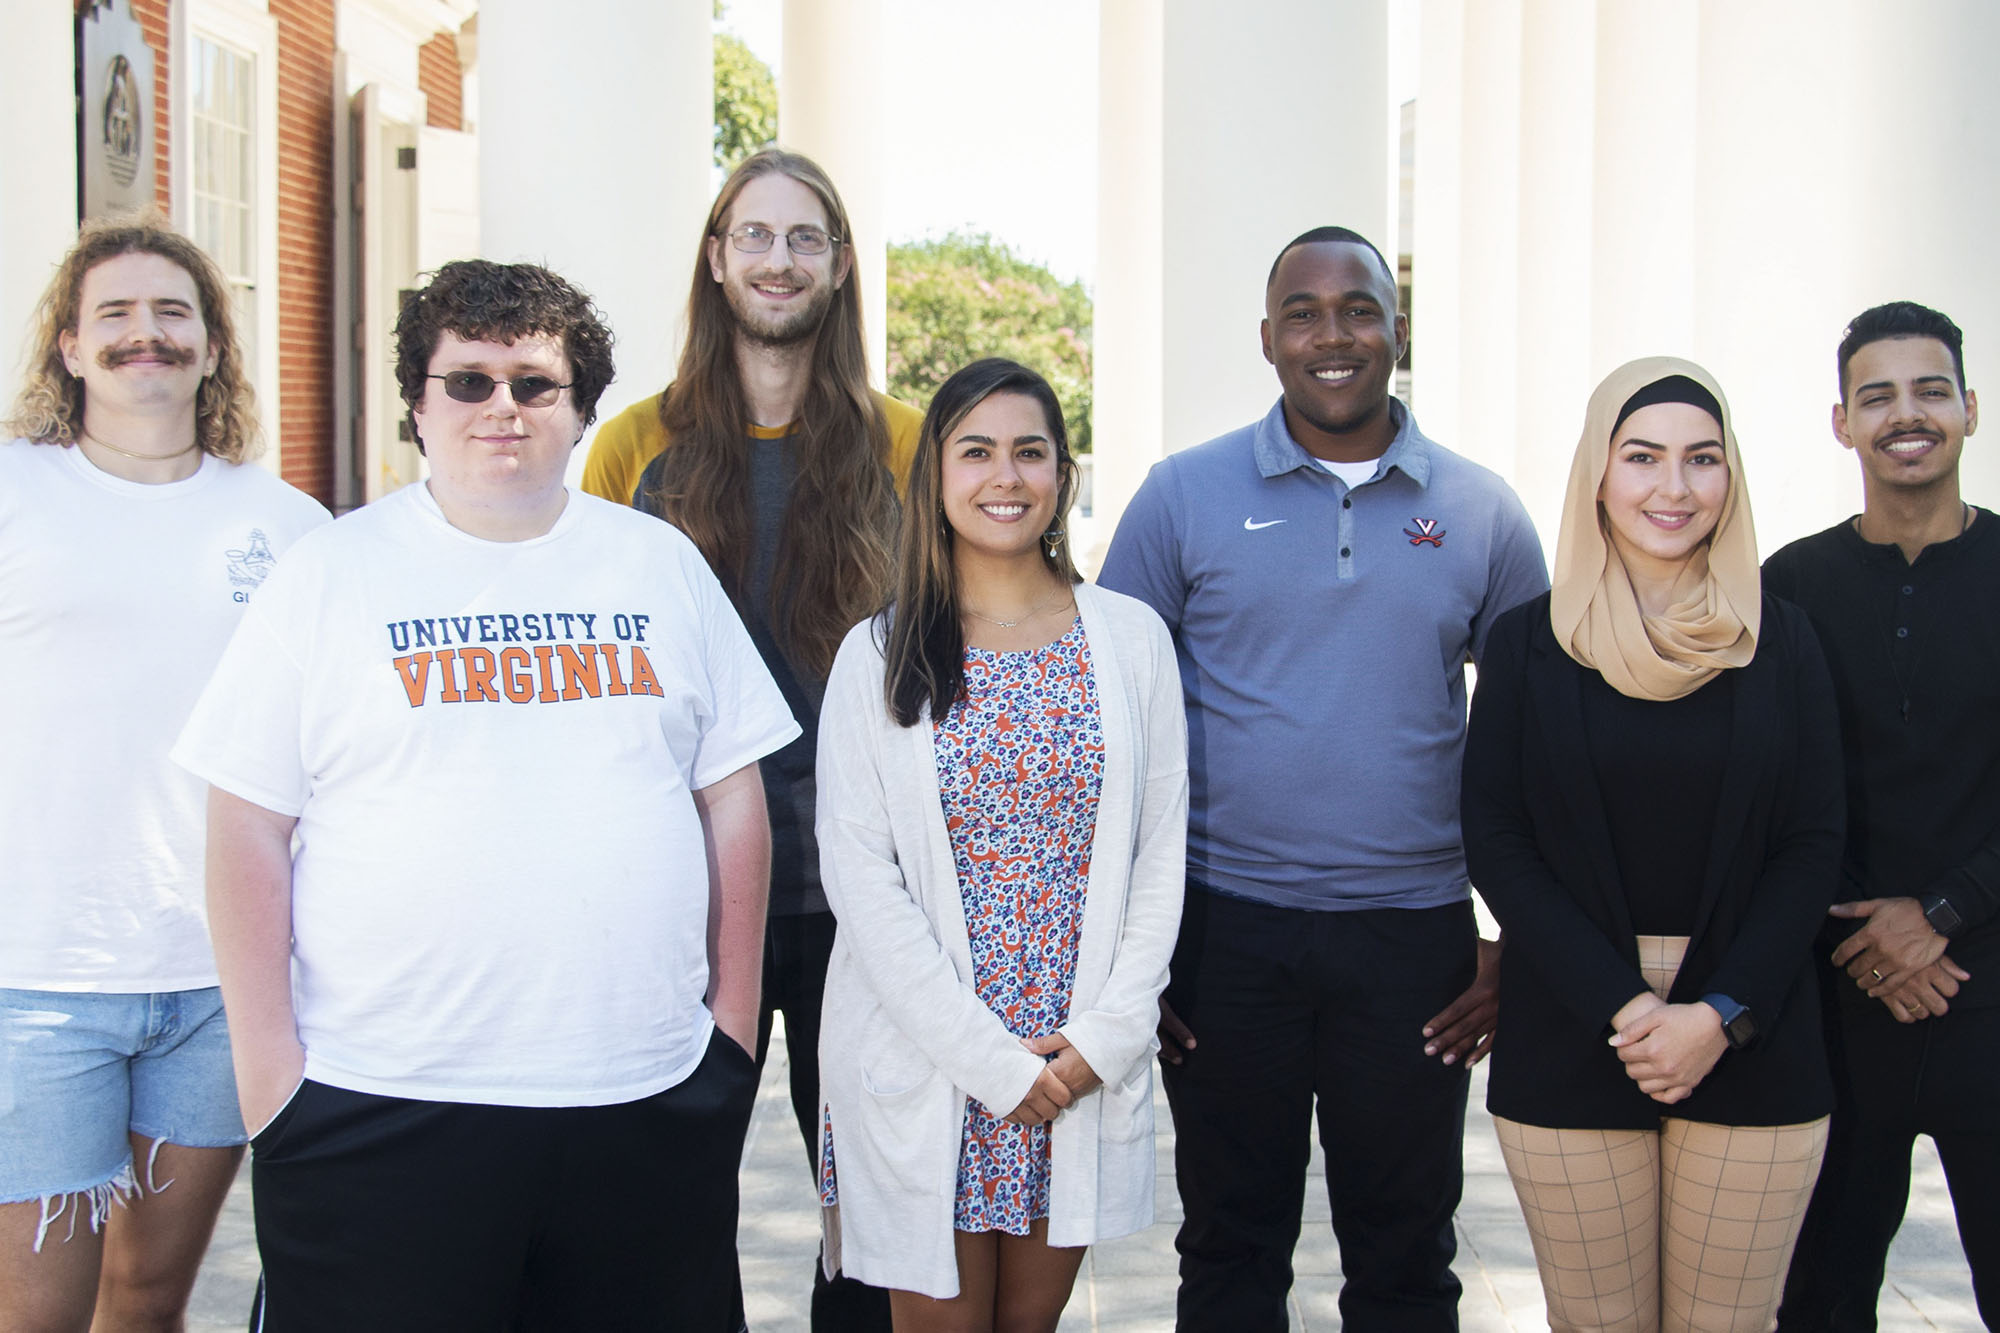 Piedmont Scholars stand in a line, from left, Liam Kidd, Justin Cary, James McIvor, Camille Garcia, Quana Dennis, Sara Abdullah and Christian Garcia Rivera